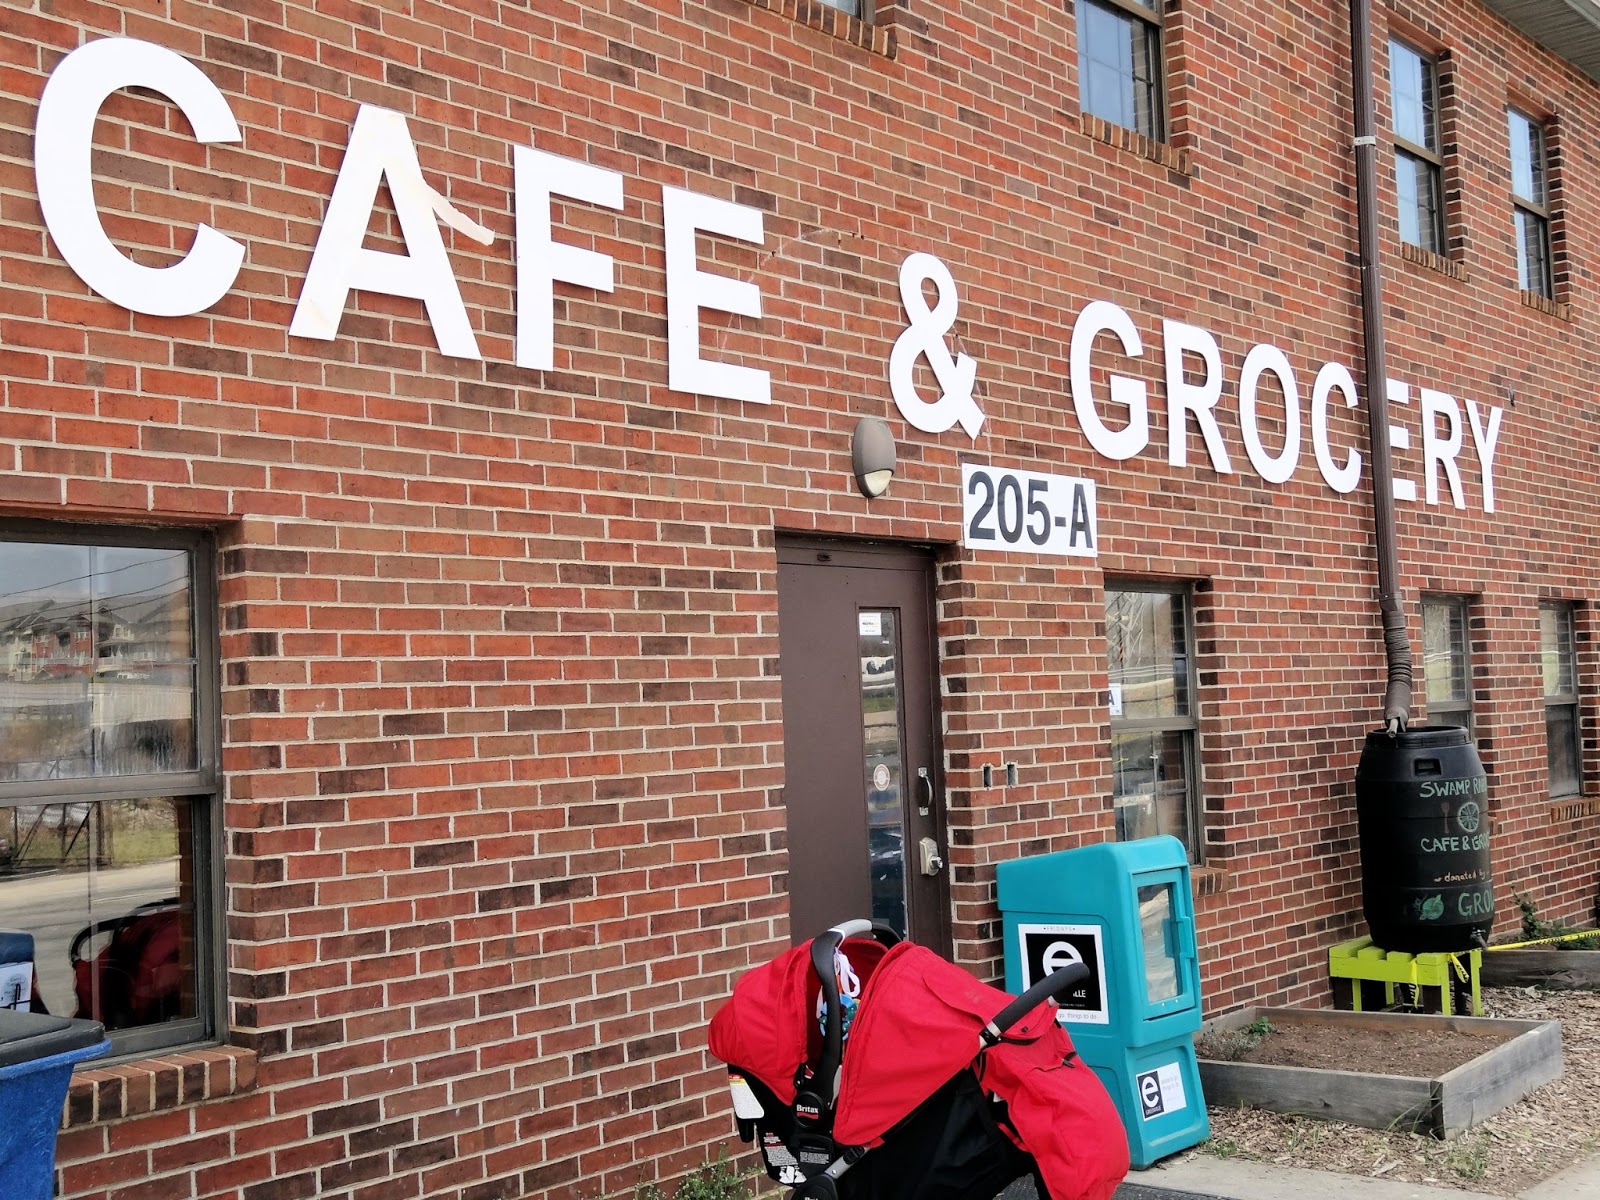 Femme au foyer: Swamp Rabbit Cafe and Grocery